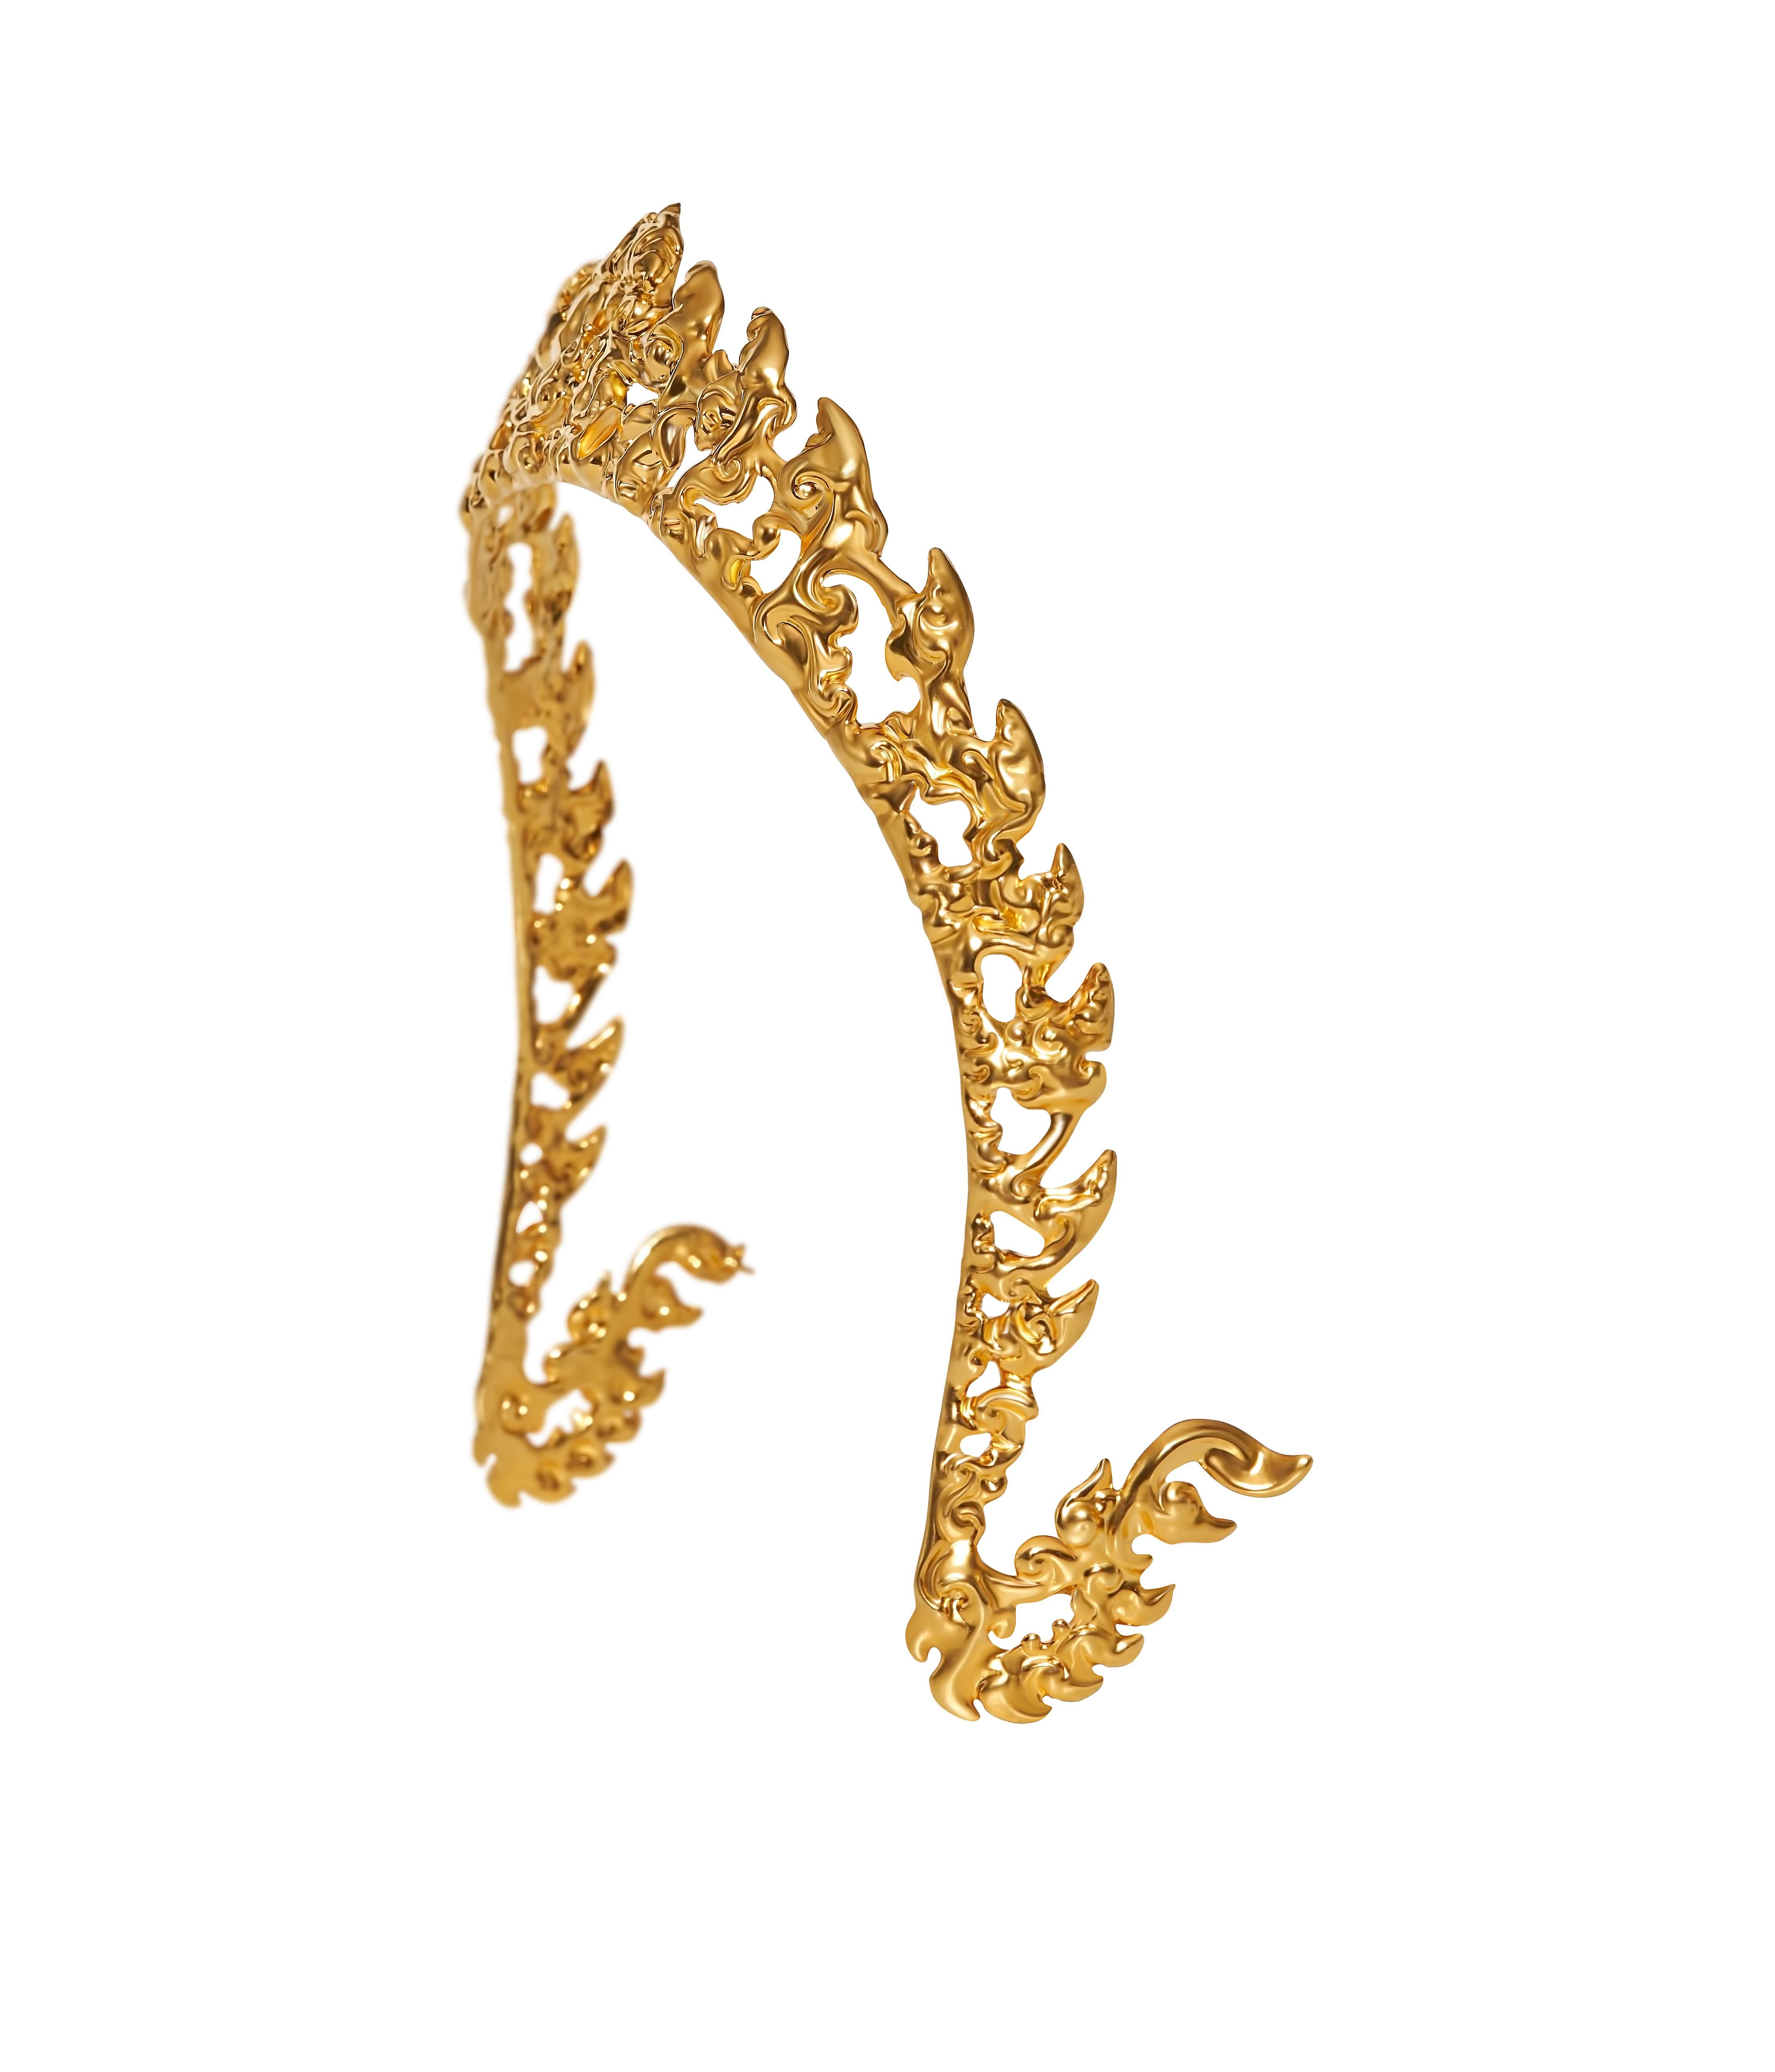 ○ 18k gold-plated ○ High quality and shiny finish ○ Features carvings of motifs inspired by Angkorian art  ○ Structurally shaped to be distinctively cultural ○ Features the naga tail on both ends  ○ Slim physique ○ Secure using two loops at each end